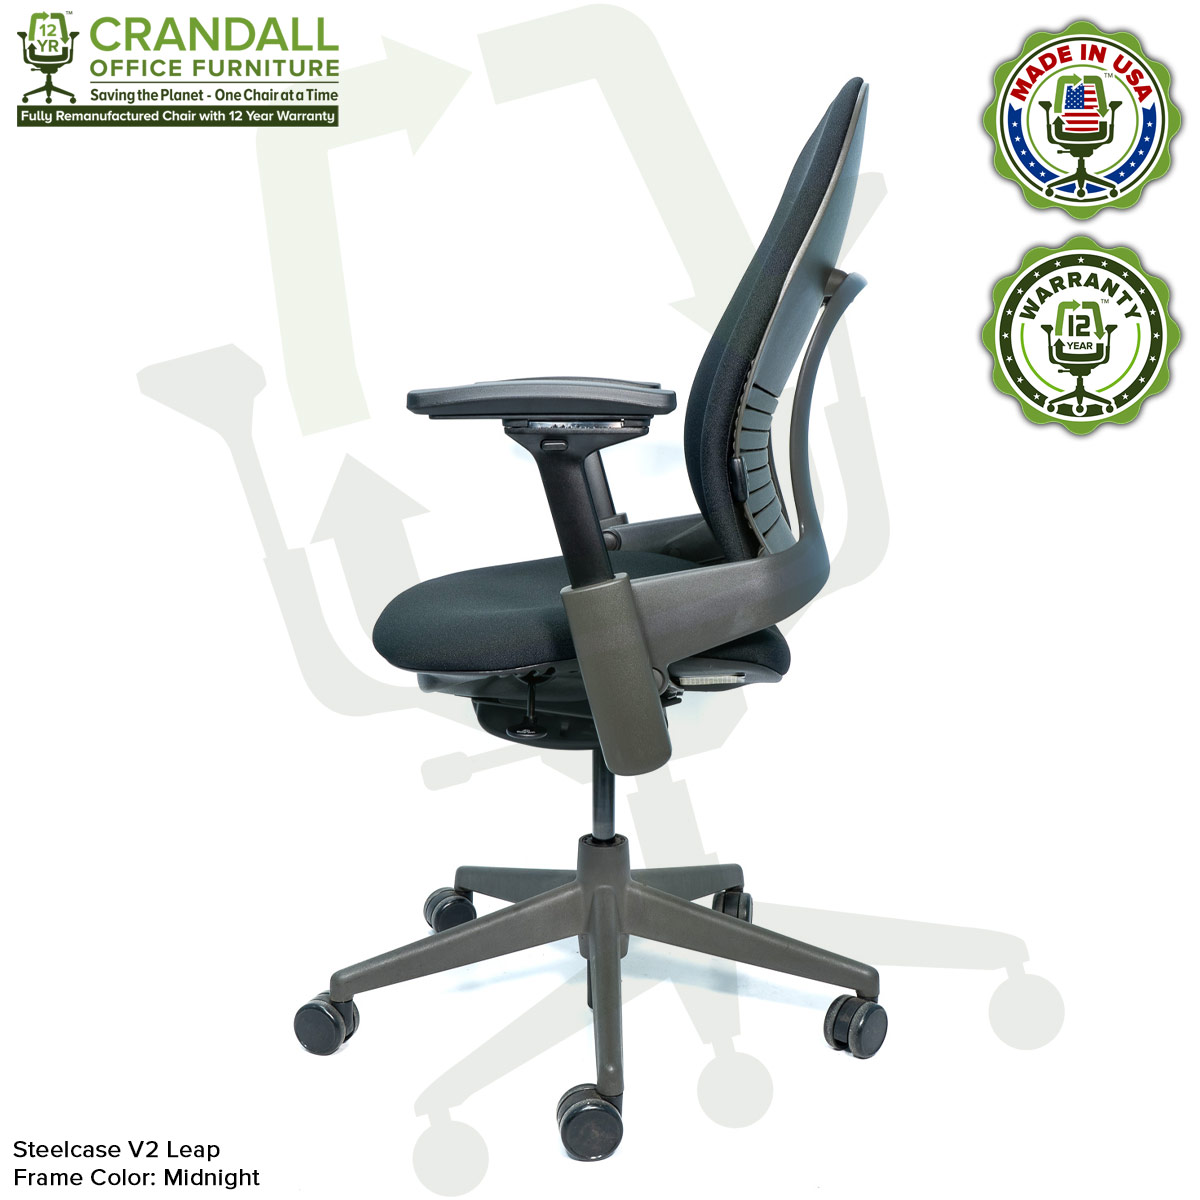 Crandall Office Furniture Remanufactured Steelcase V2 Leap Chair - Midnight Frame 04